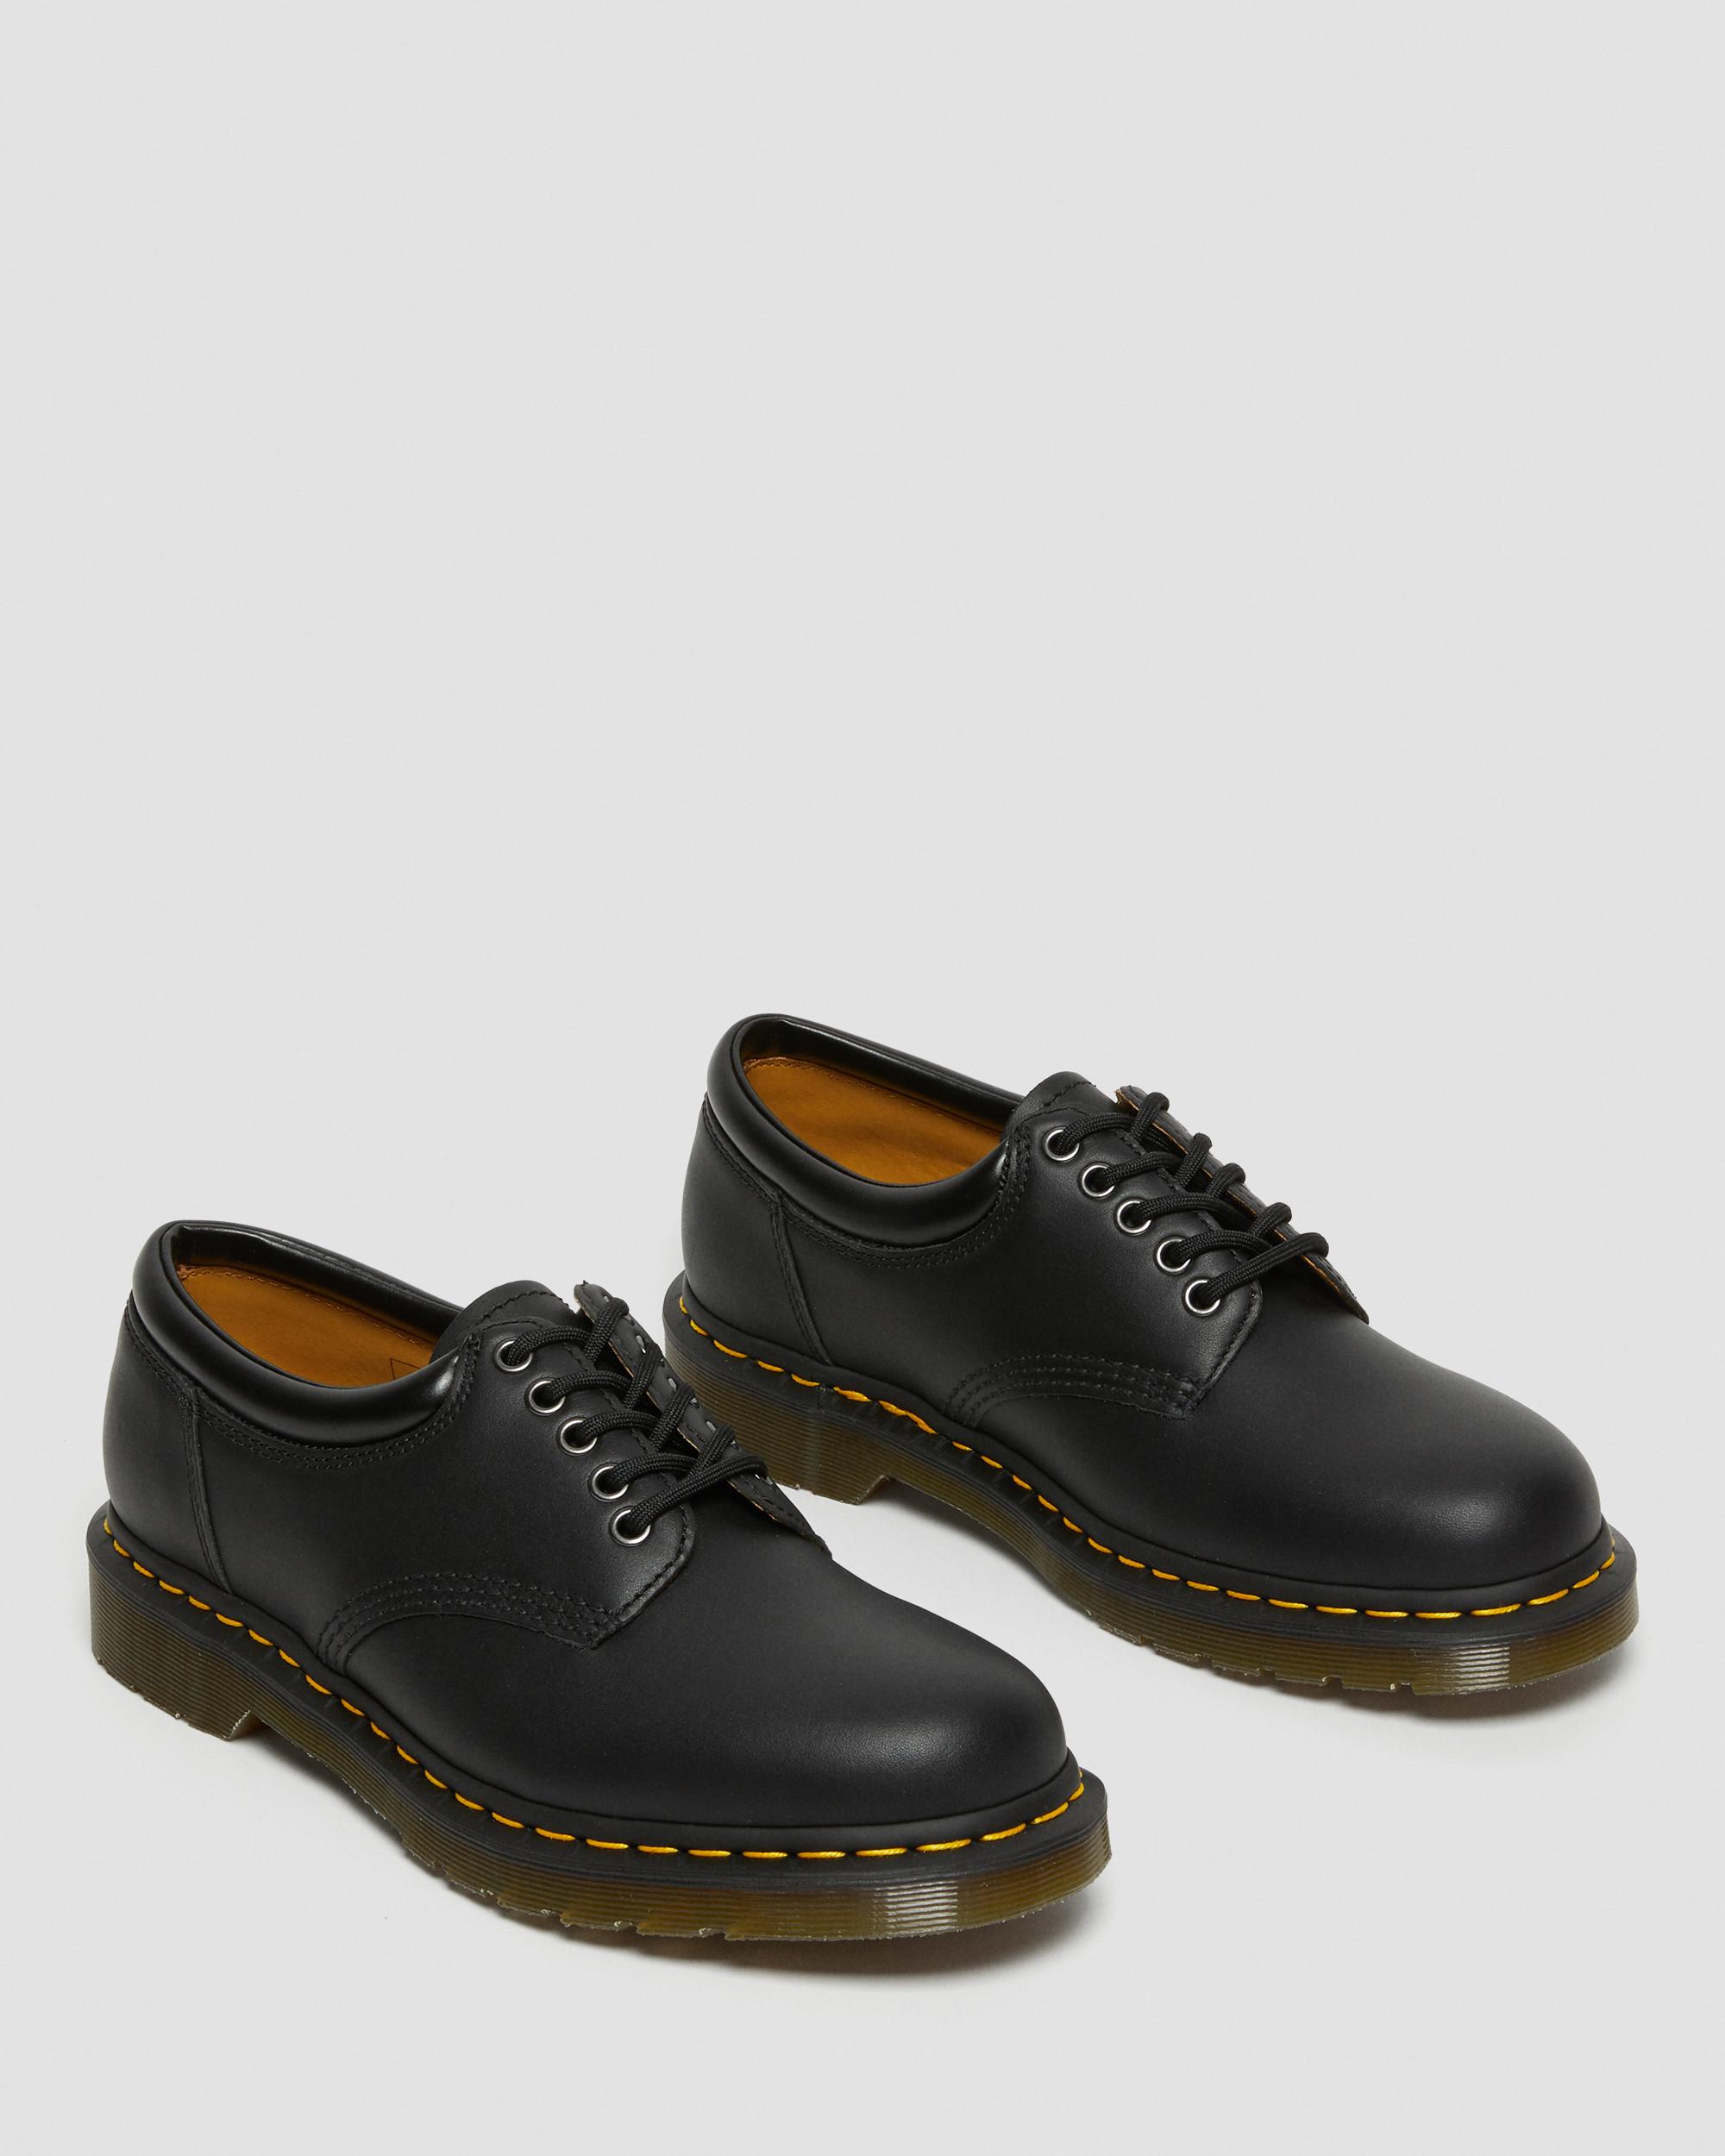 8053 Leather Platform Casual Shoes in Black